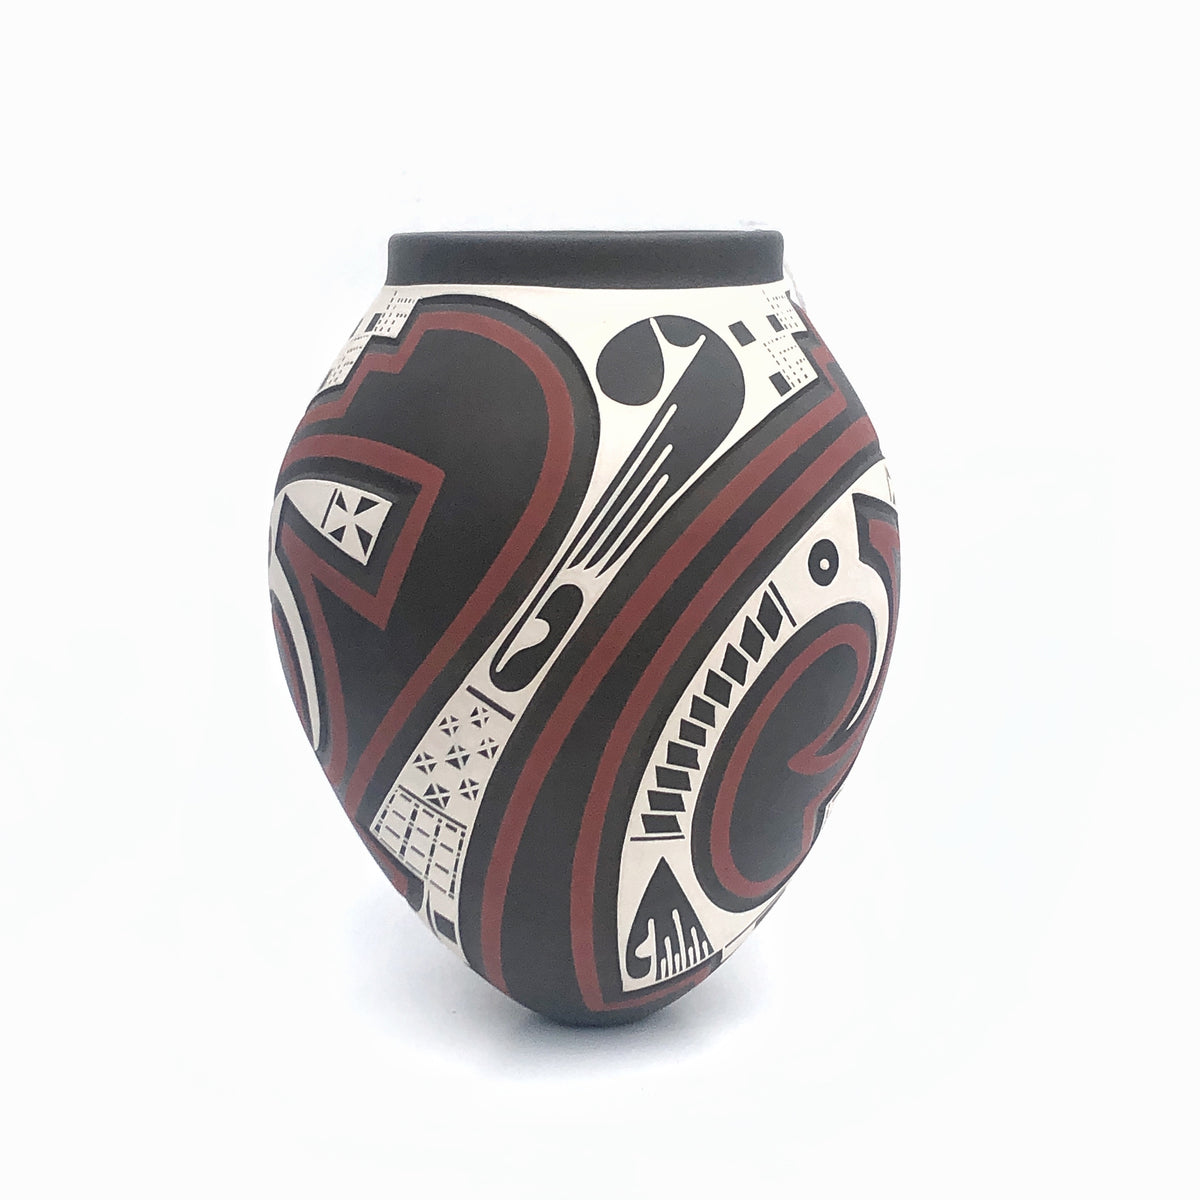 Engraved and Painted Pot by Lazaro Osuna Silveira